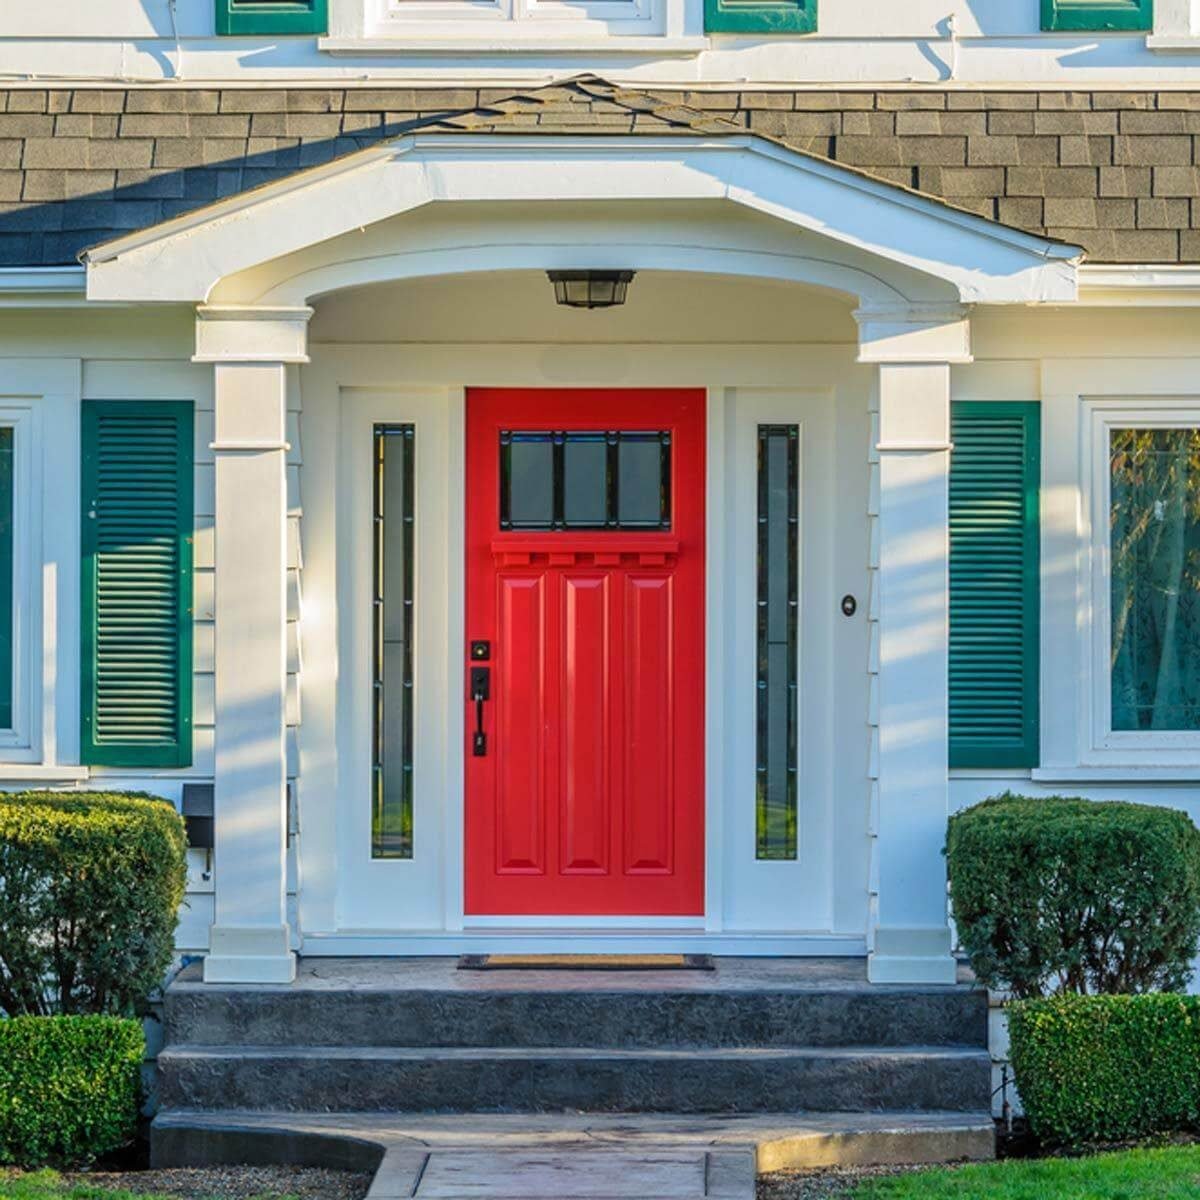 16 Ways to Add Curb Appeal for Less Than $50